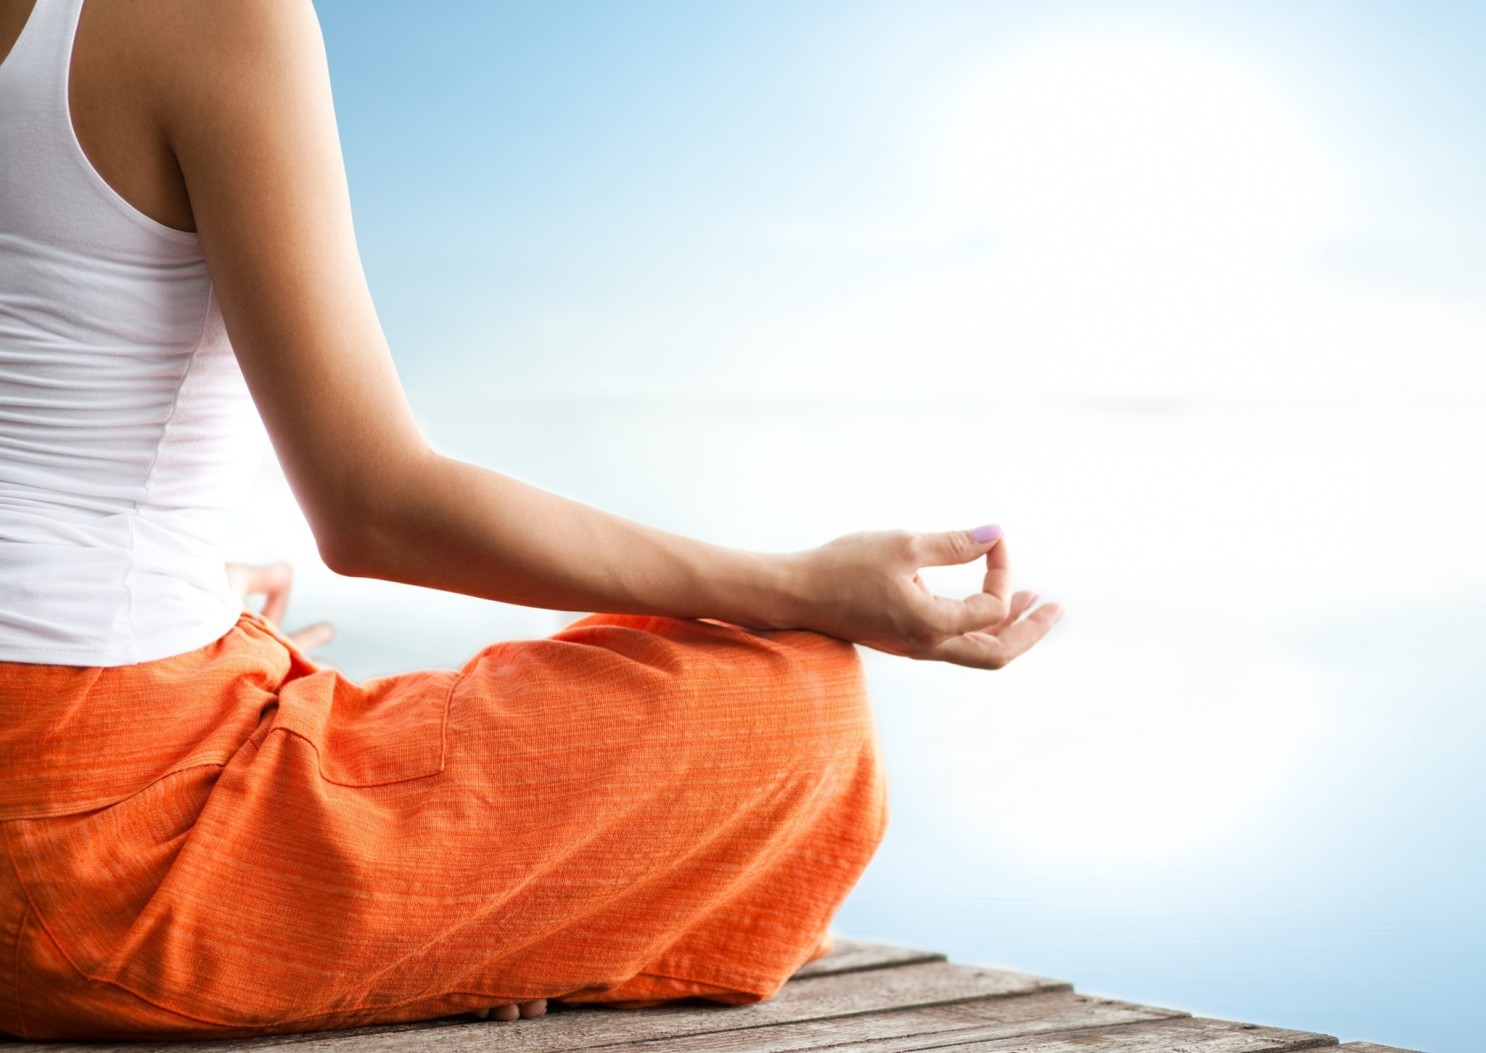 Why do we meditate? Are there really any benefits of meditation?